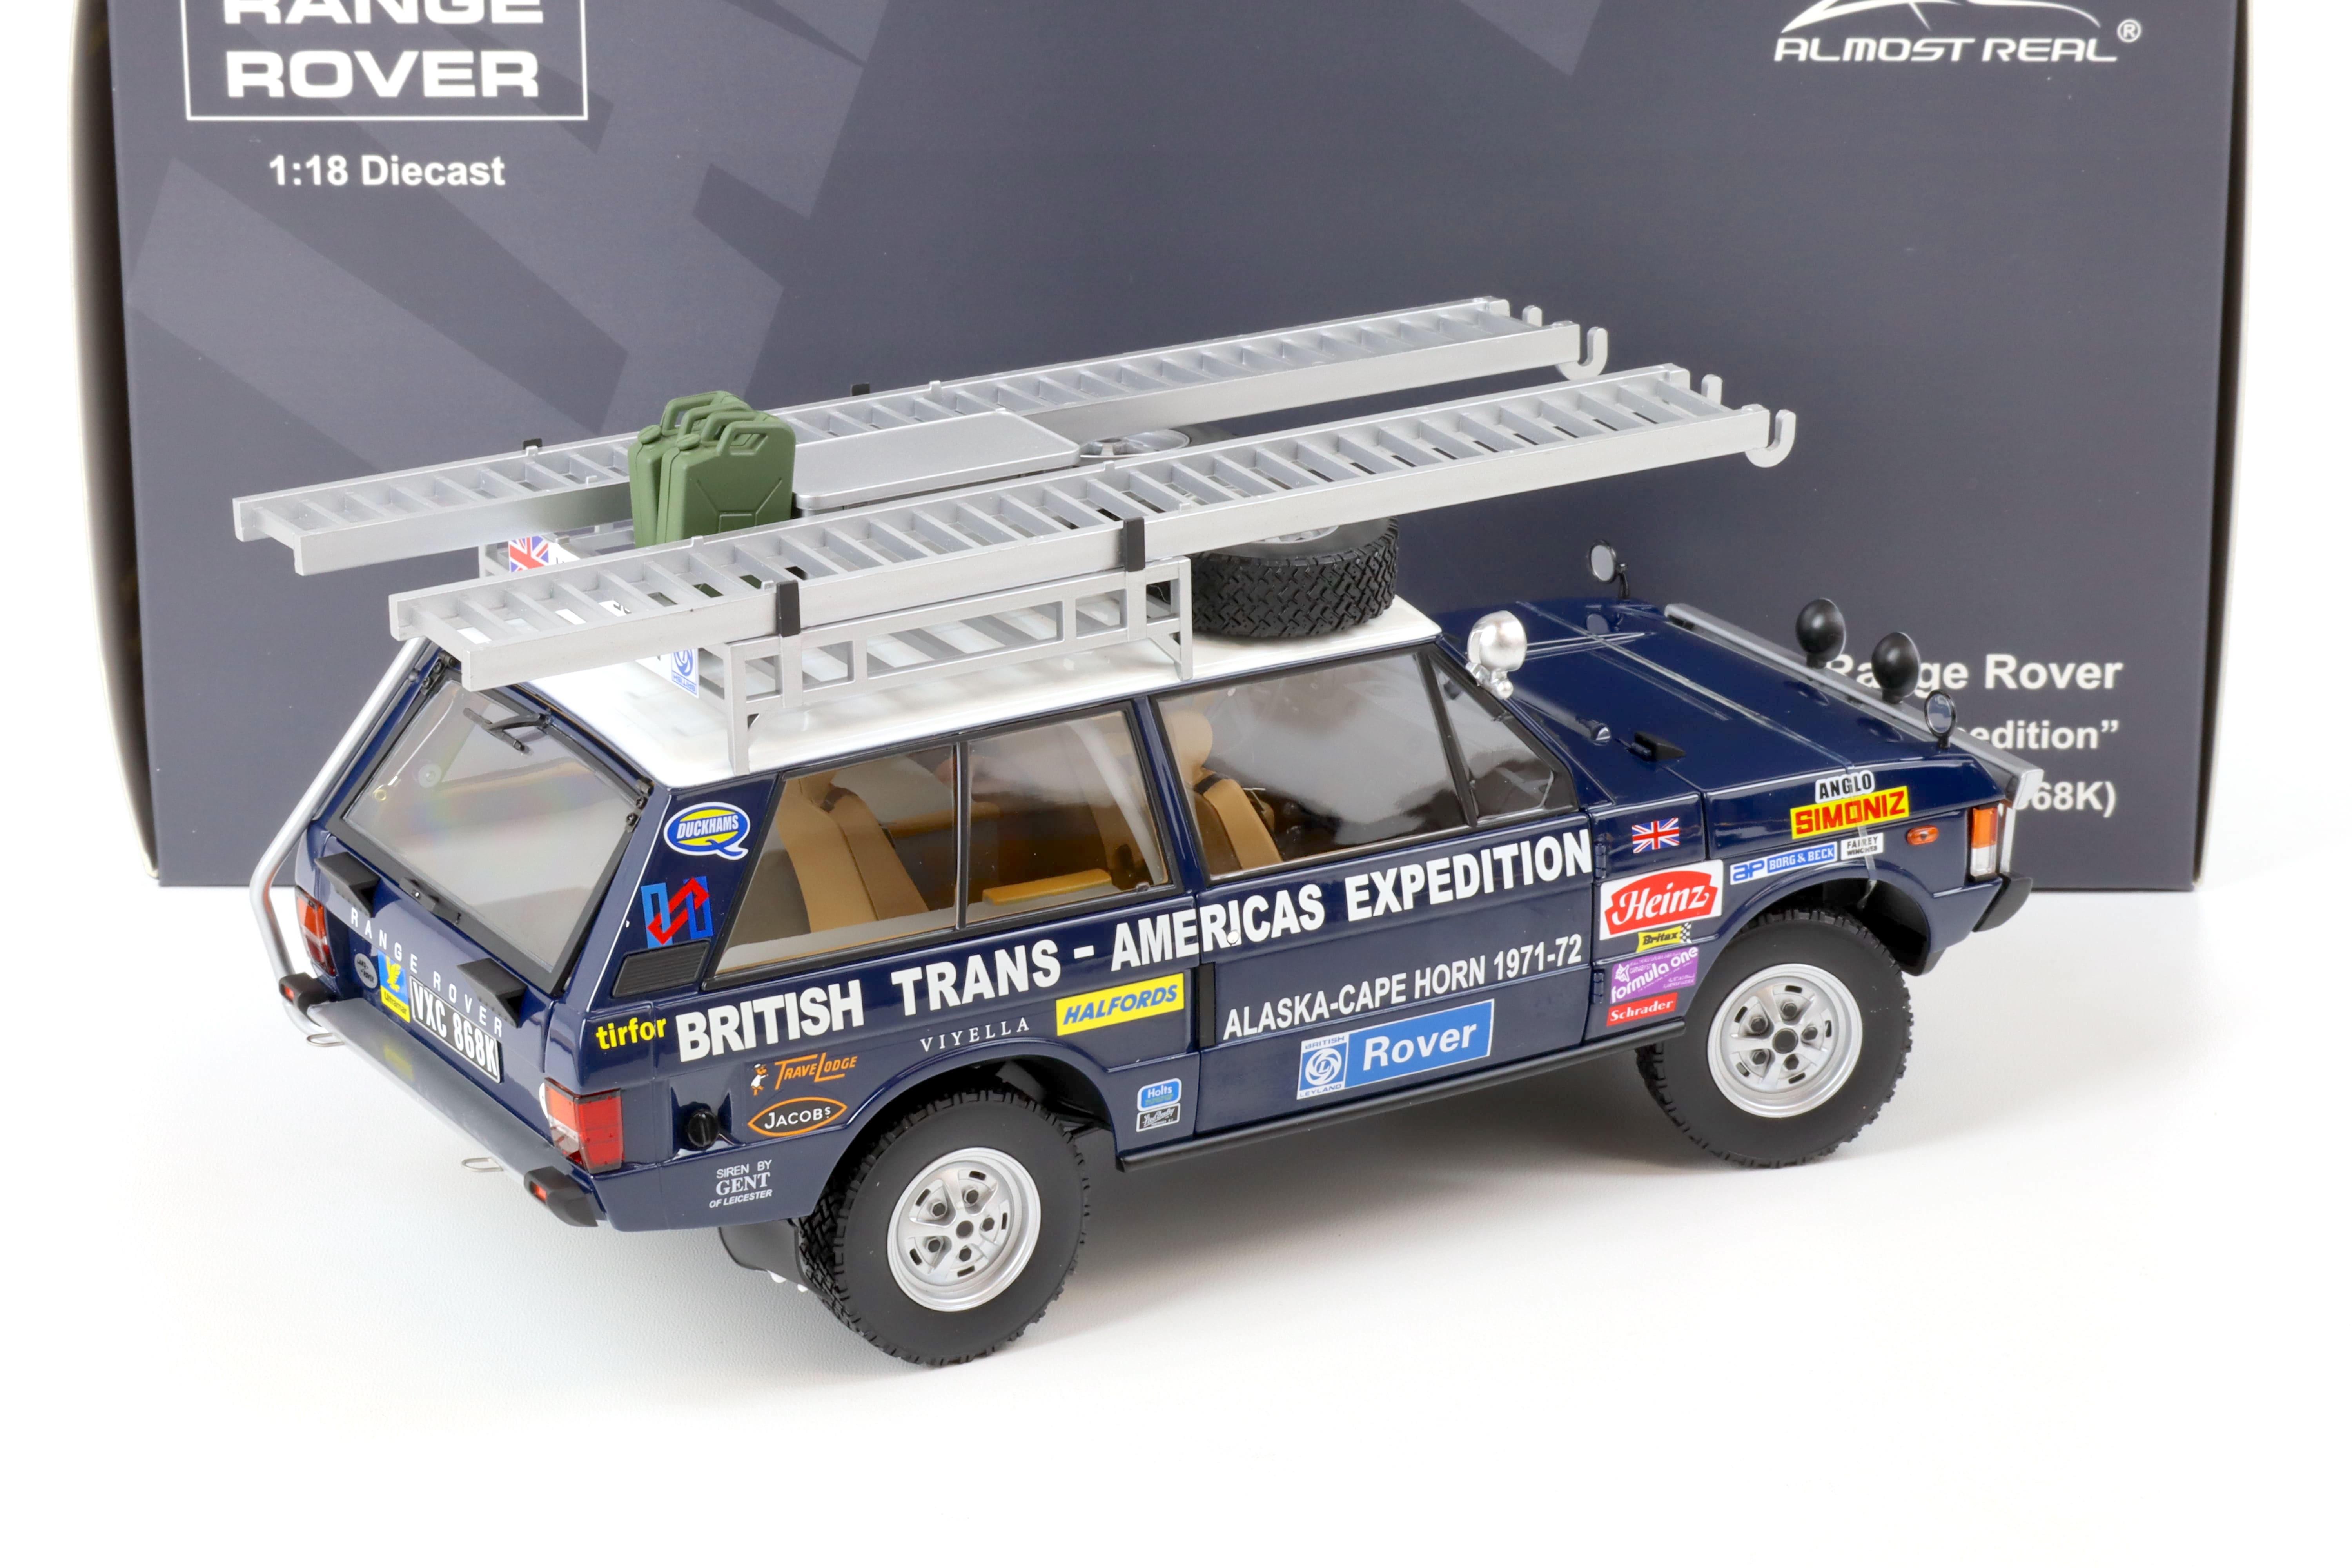 1:18 Almost Real Land Rover Range Rover Trans-Americans Expedition 868K 1971-72